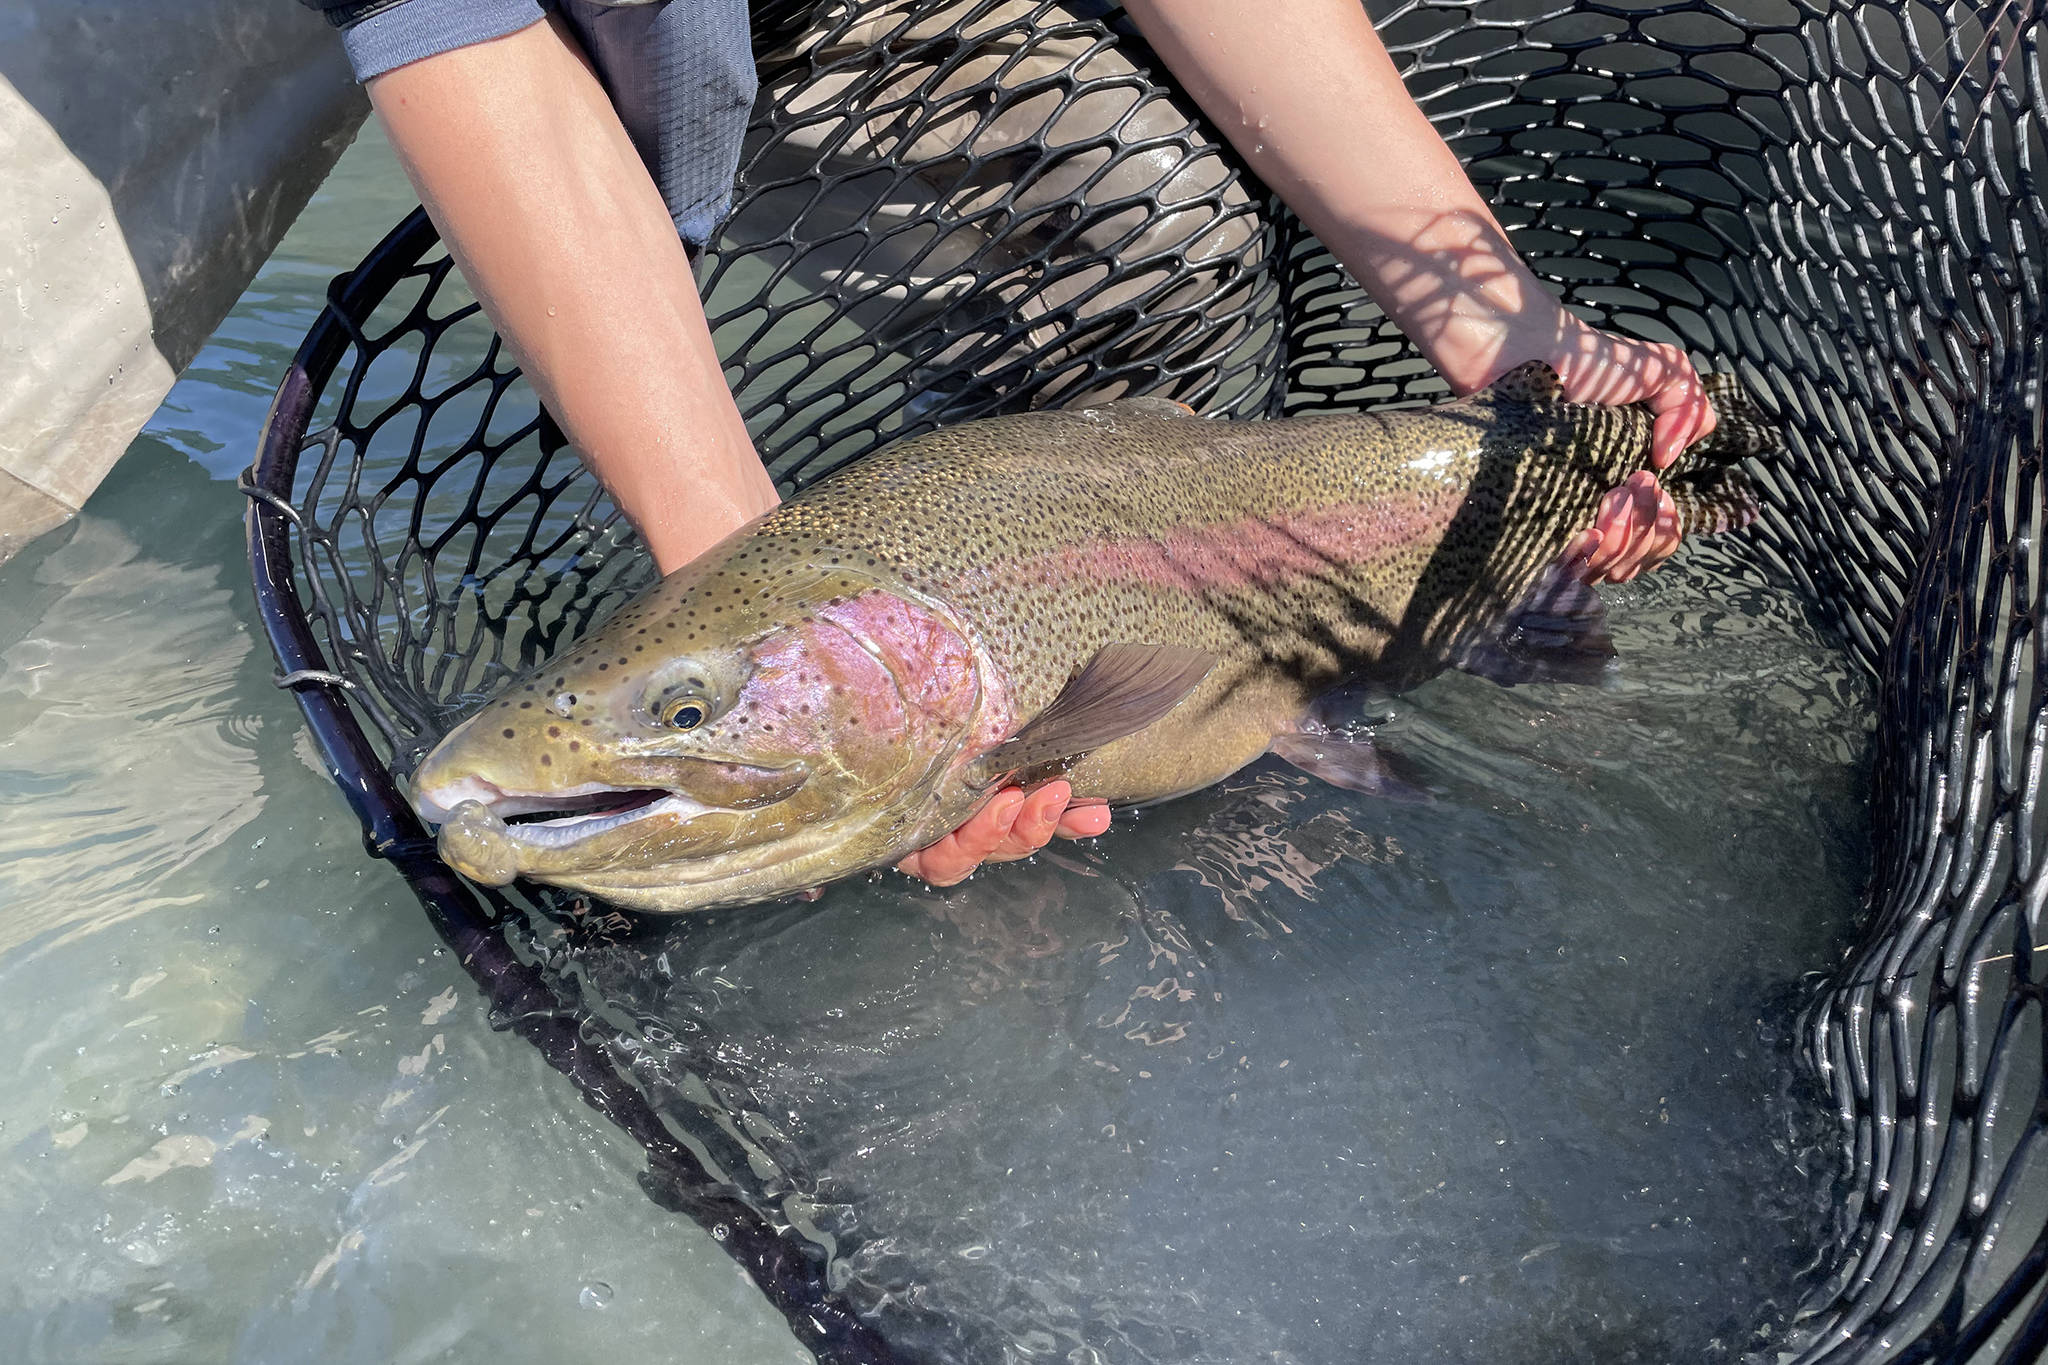 The author's wife releases a Kenai River rainbow trout during the first day of their honeymoon on the Kenai Peninsula. (Jeff Lund / For the Juneau Empire)